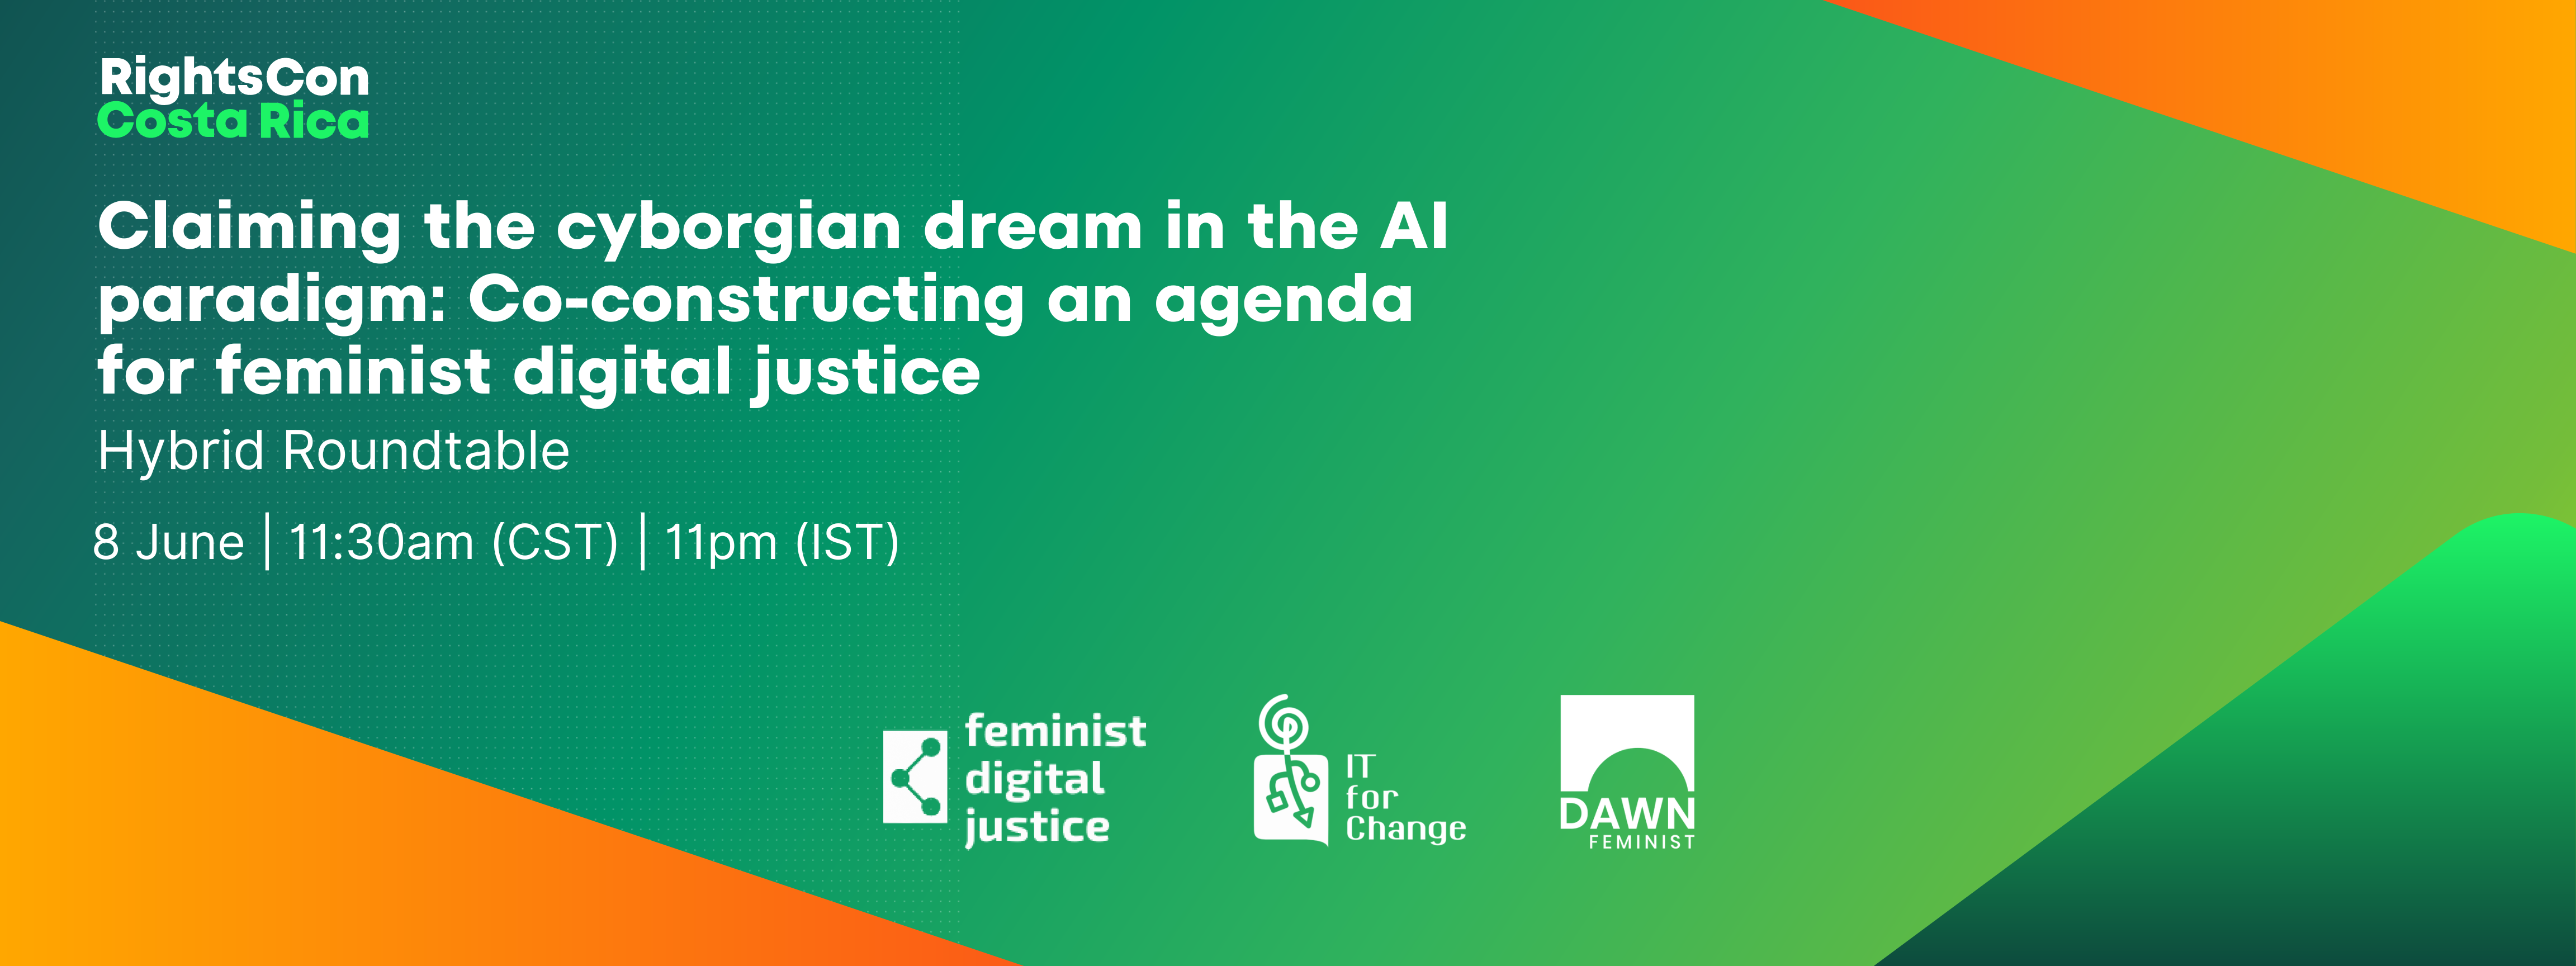 Claiming the Cyborgian Dream in the AI paradigm: Co-constructing an genda for feminist digital justice on 8 June 2023 at 11pm IST or 11:30am CST. Hosted by DAWN, IT For Change, and the Feminist Digital Justice Project during Rightscon 2023 in Costa Rica.